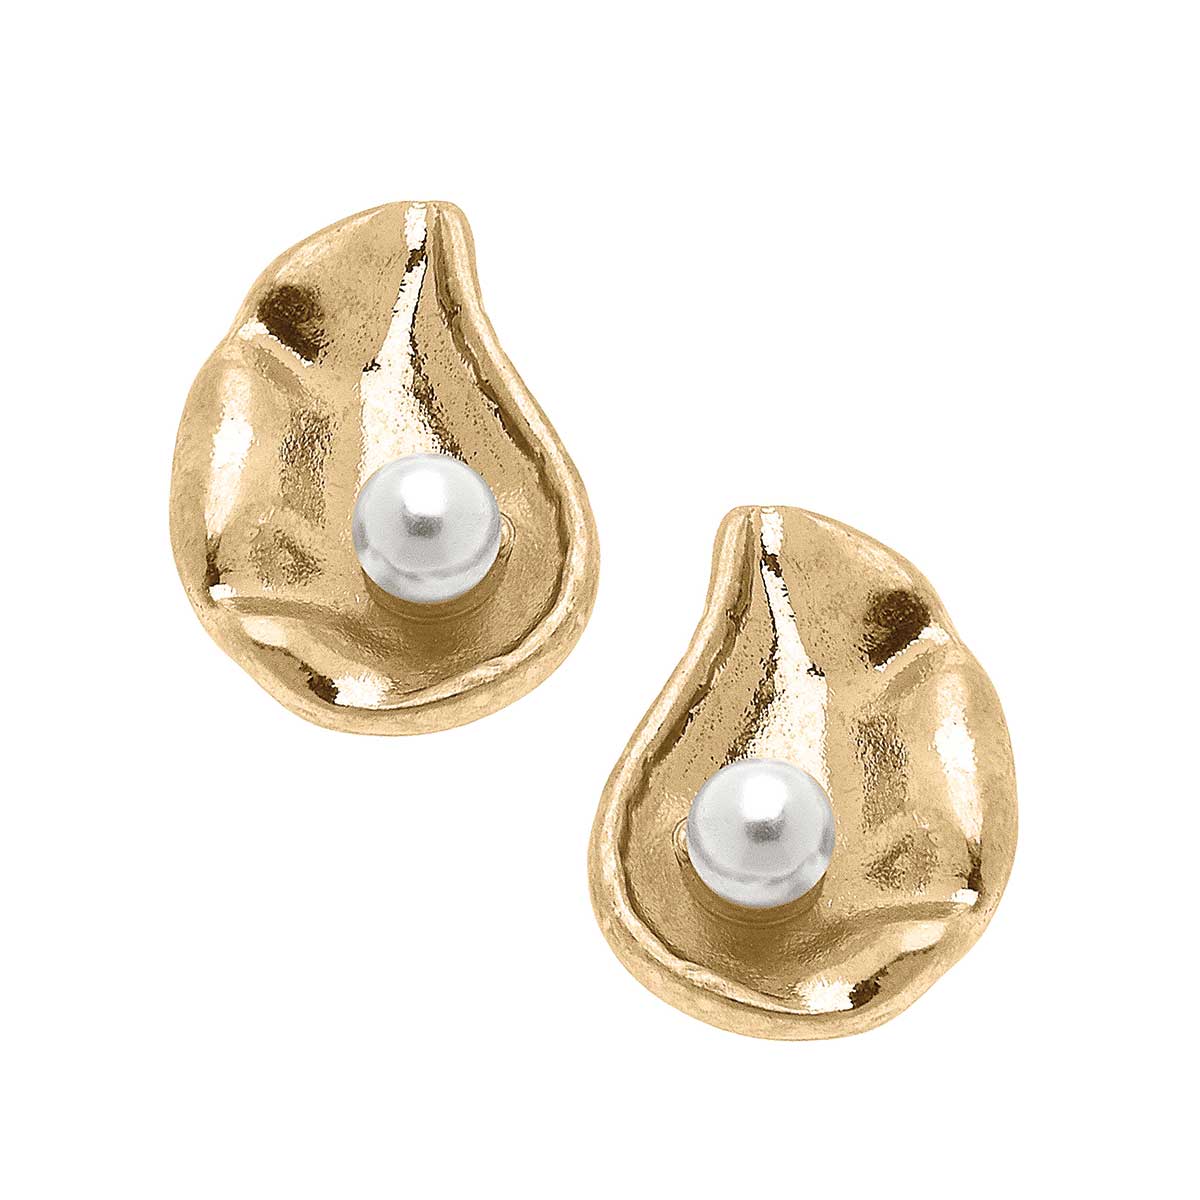 Oyster with Pearl Stud Earrings in Worn Gold